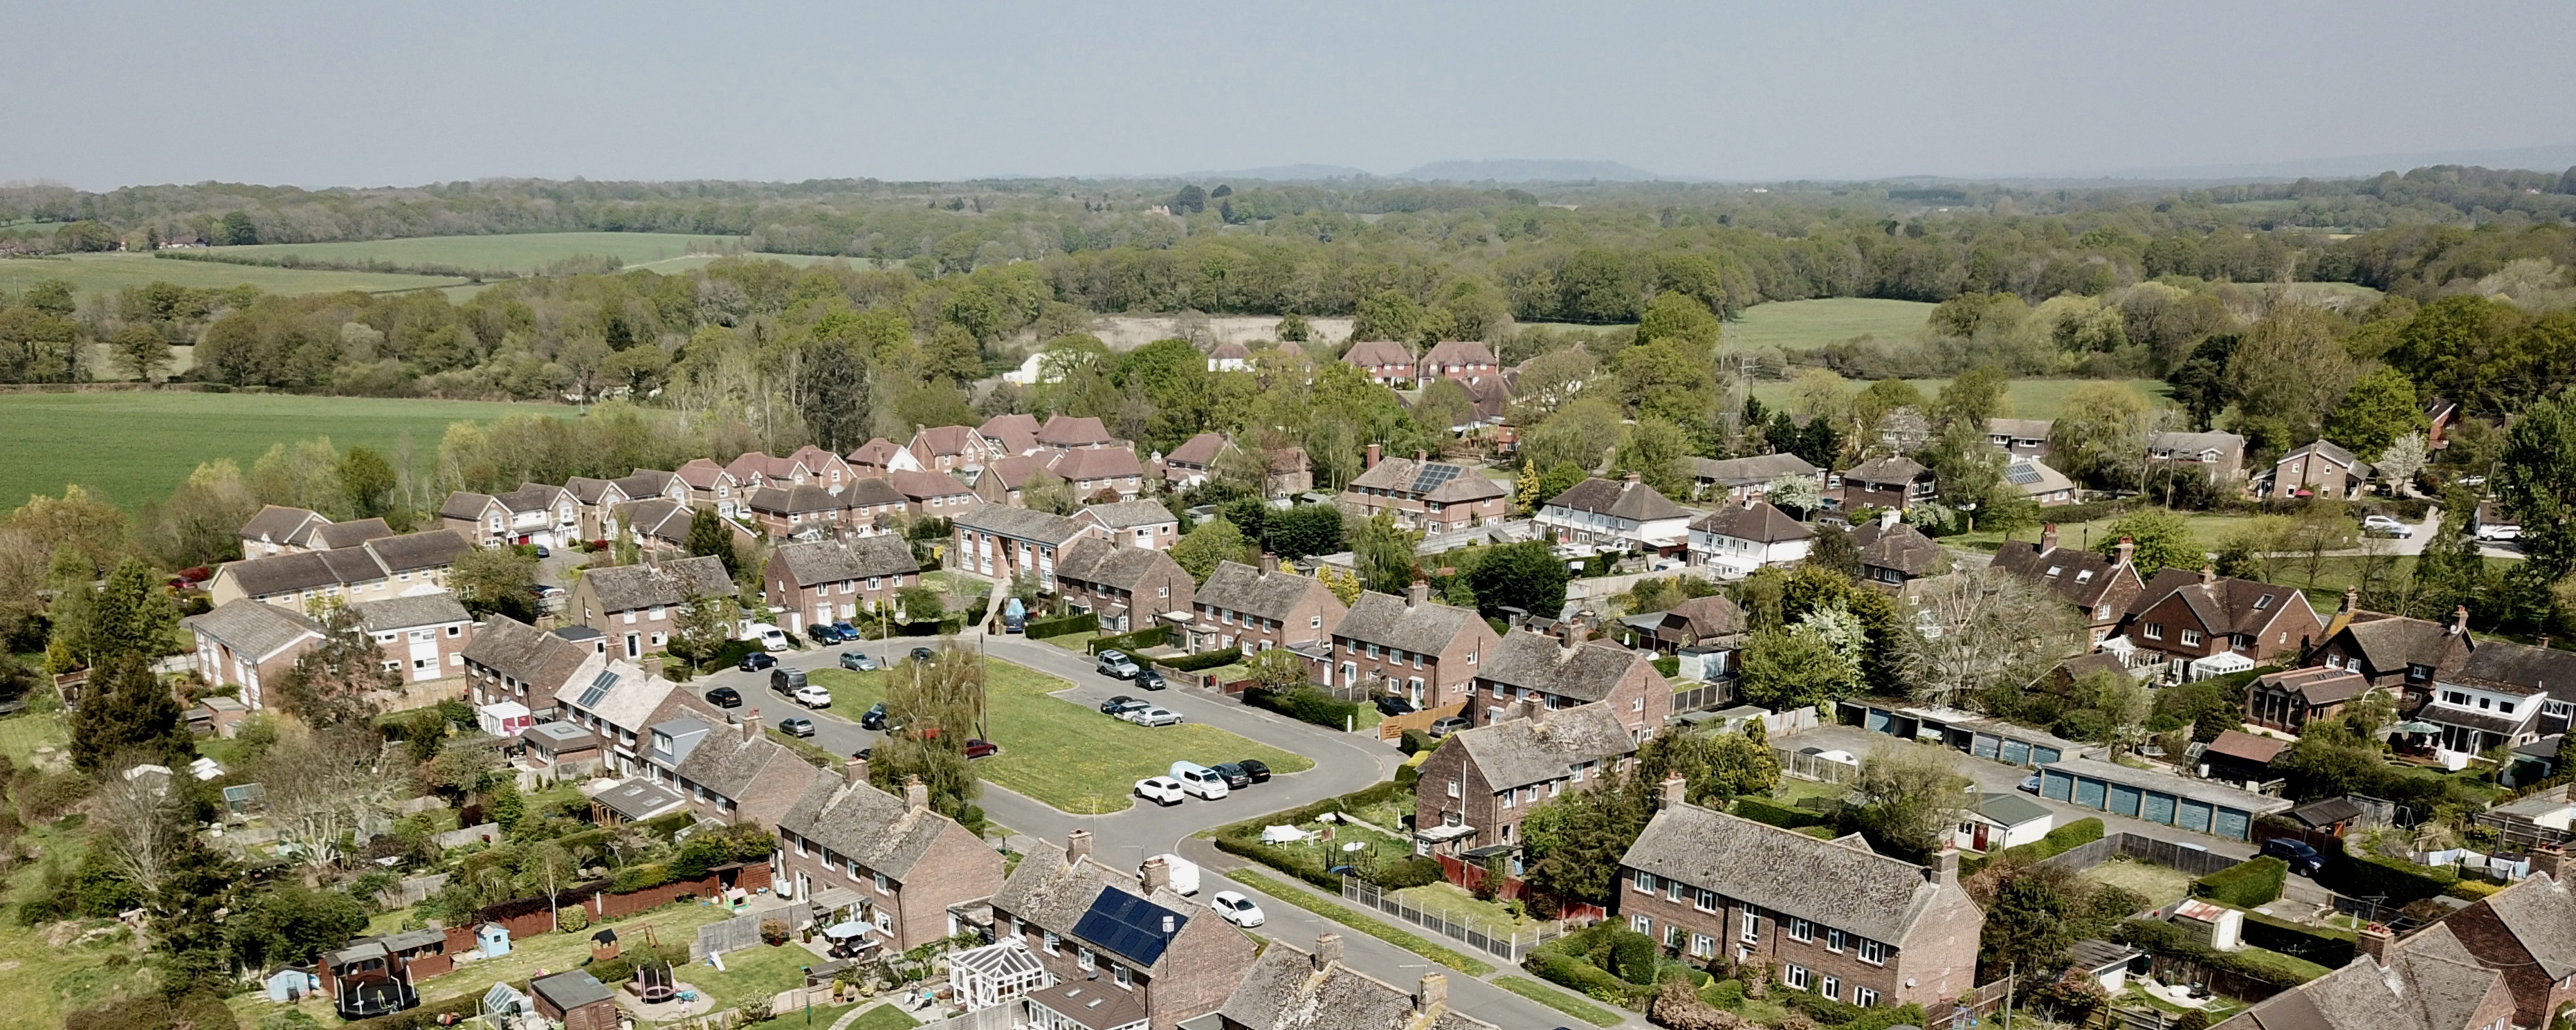 Kirdford Village from the air